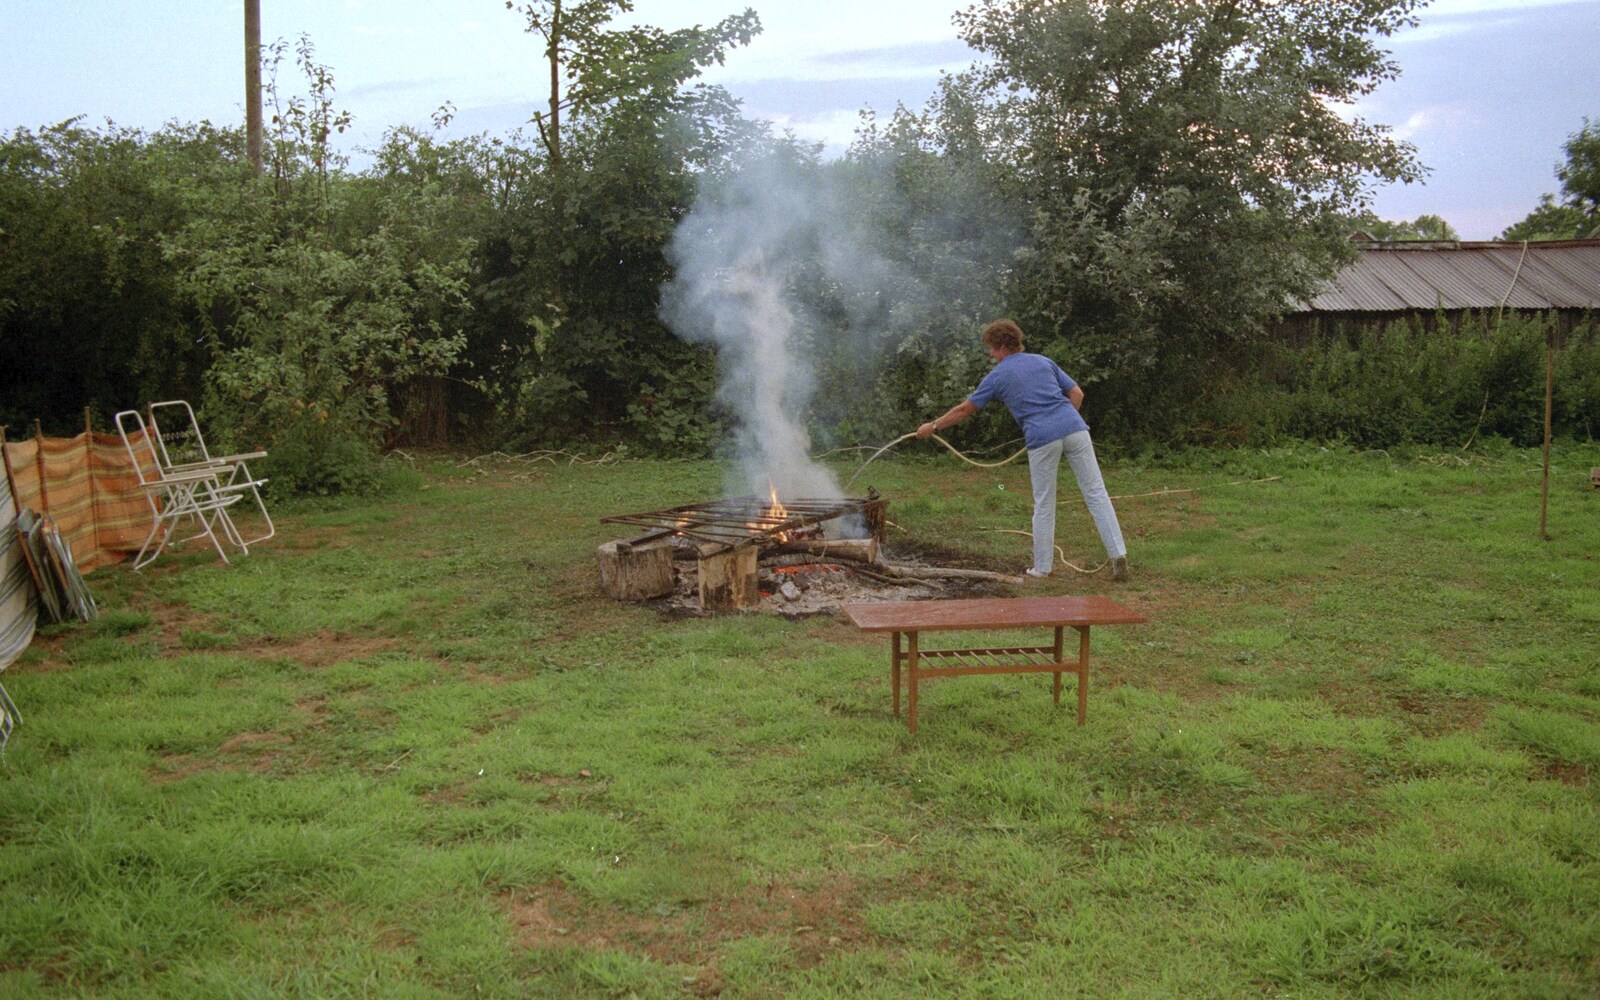 Brenda squirts the fire with a hosepipe from Sue's Fire Dance, Stuston, Suffolk - 21st July 1990